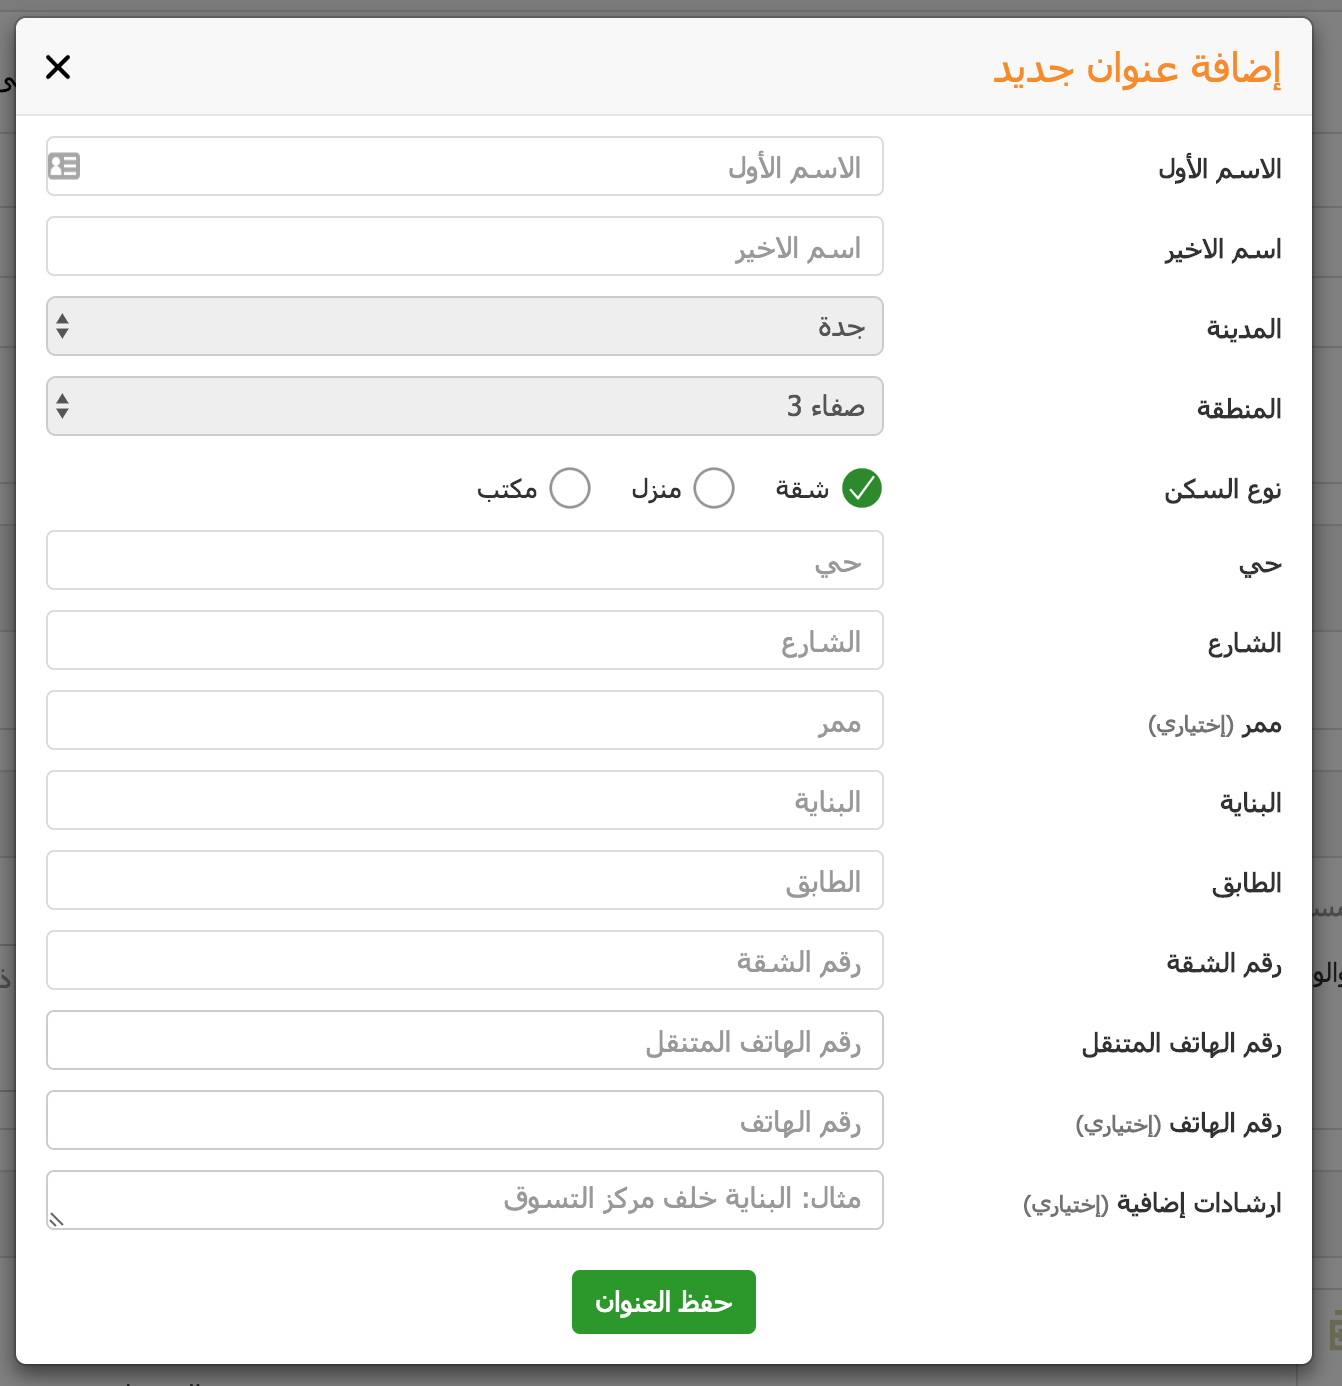 Saudi Arabian food delivery website Talabat, asking for an address without a postcode field [Original]